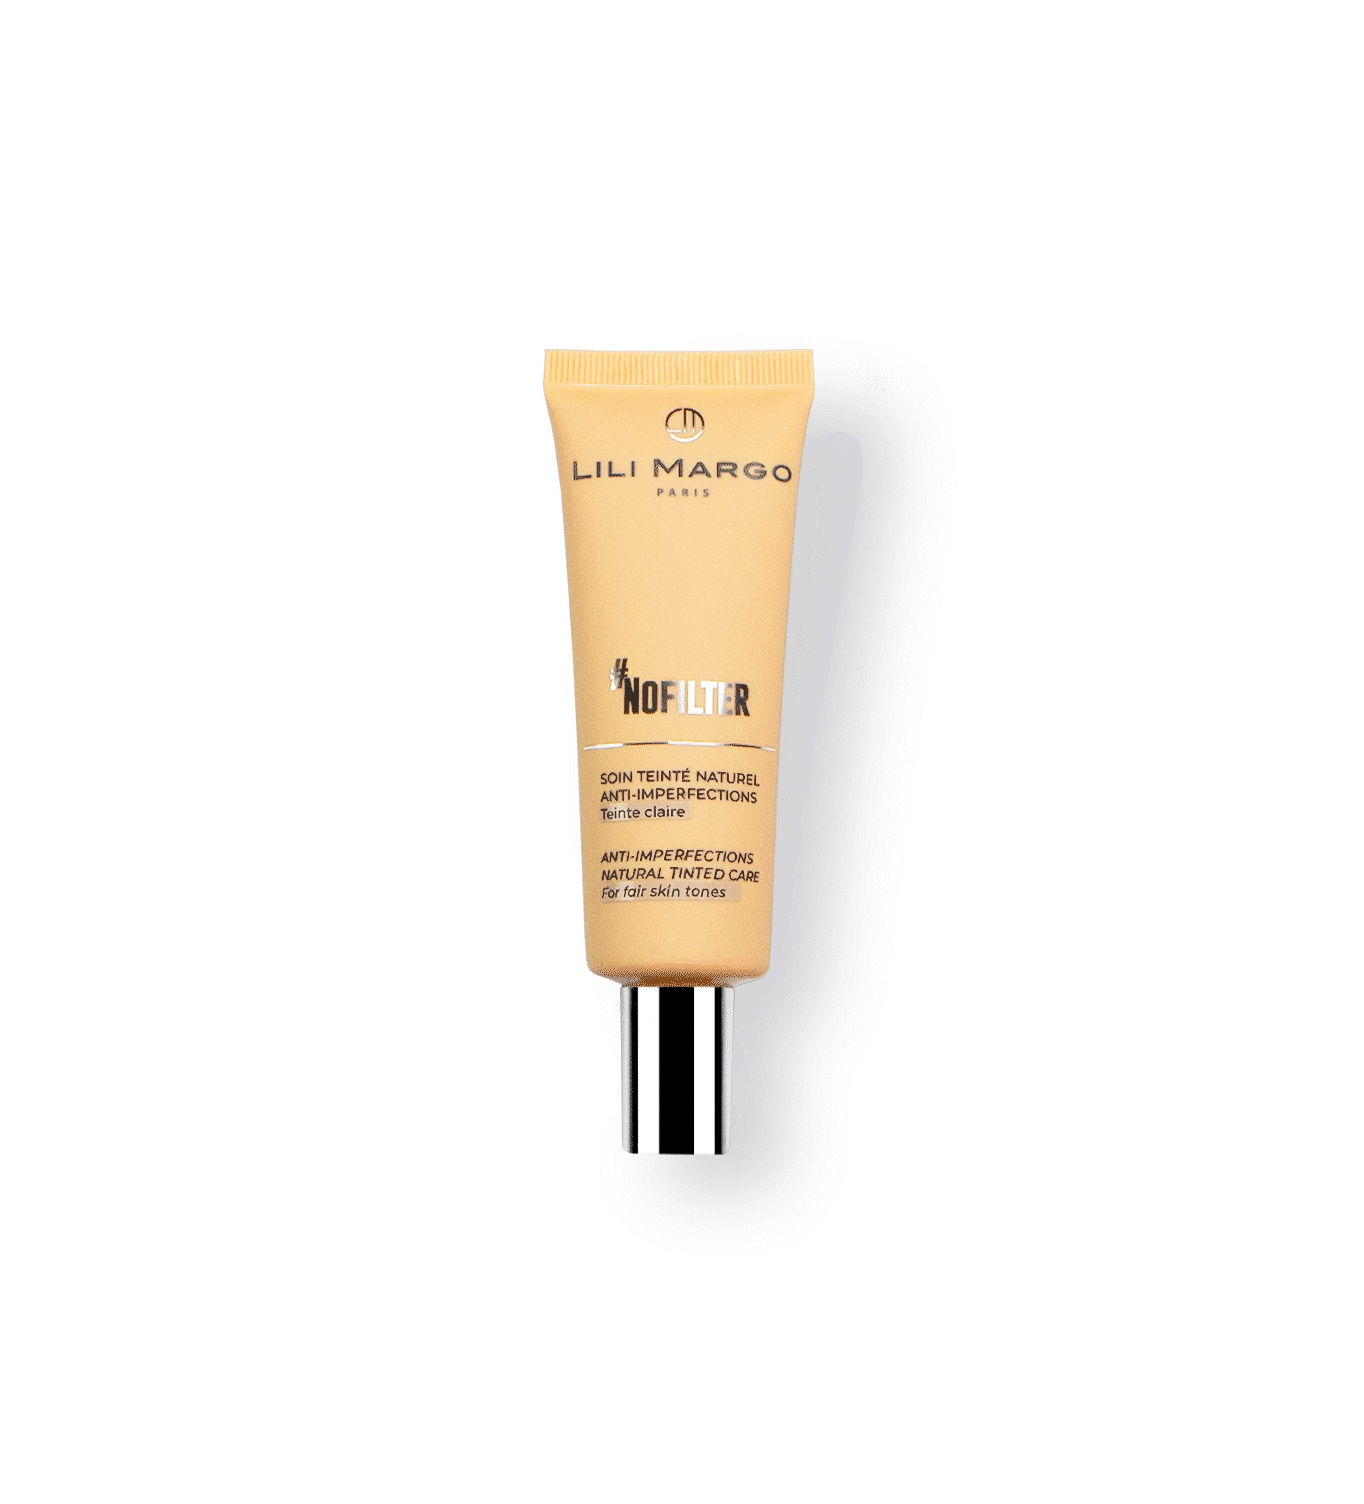 Anti-Imperfections Natural Tinted Care for Fair Skin Tones